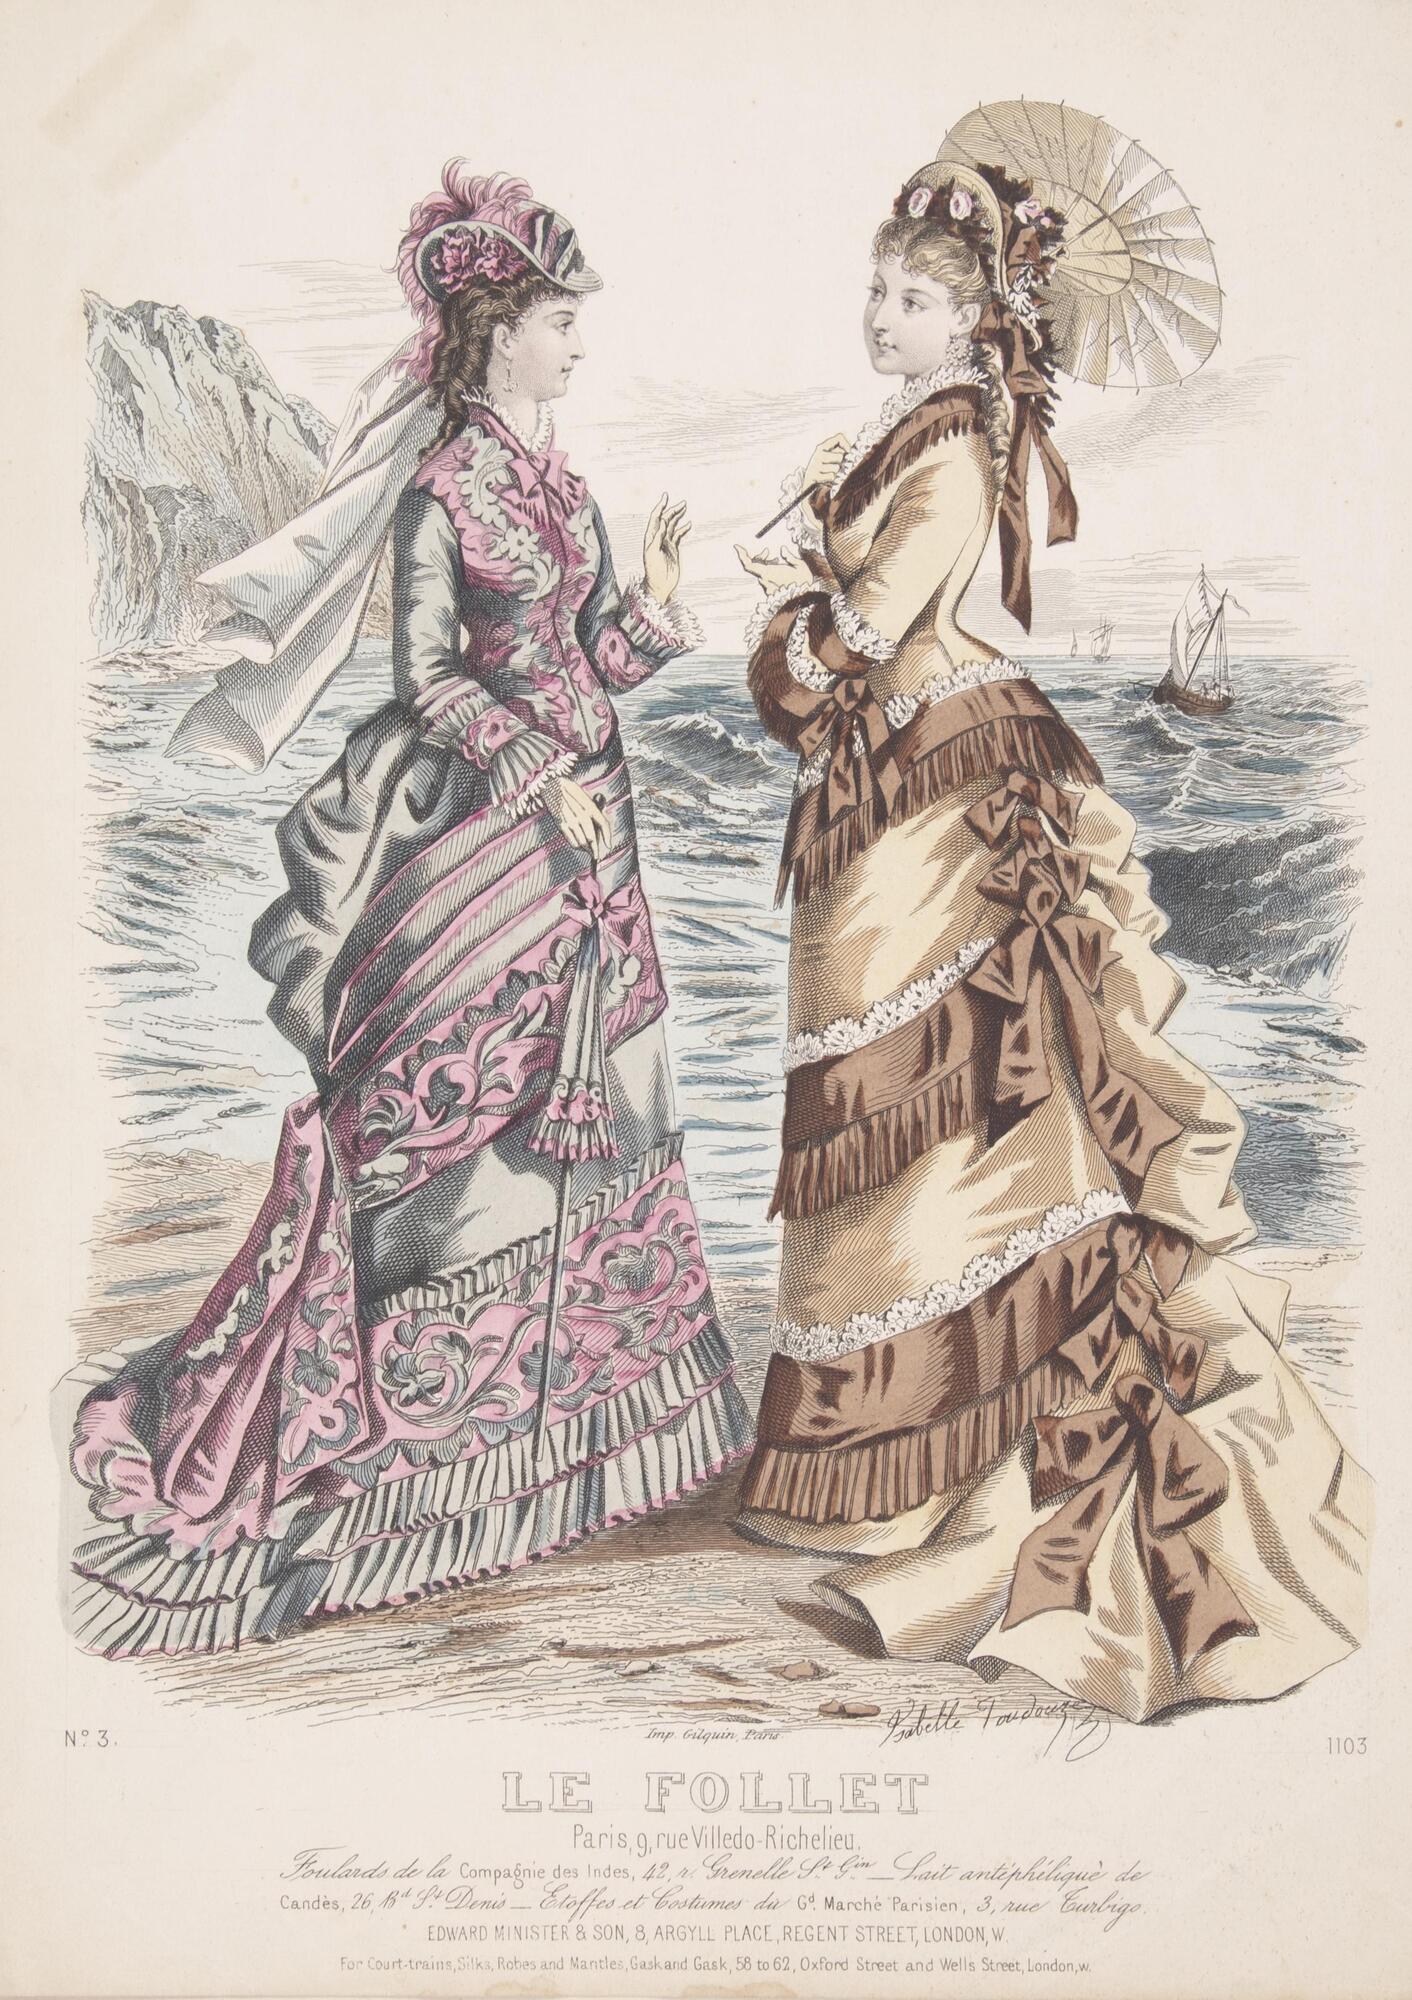 This colored engraving features two women in elaborate dress on a beach with a wavy ocean behind them. The woman on the left wears a blue dress accented with pink and a hat in the same colors. The woman on the right wears a beige dress accented in brown and white and a hat in the same colors decorated with flowers. She also holds a small parasol above her head. The women appear engaged in conversation as they both gesture with their hands. In the distance in the water on the right there are three ships. On the left in the distance a rock formation is depicted.